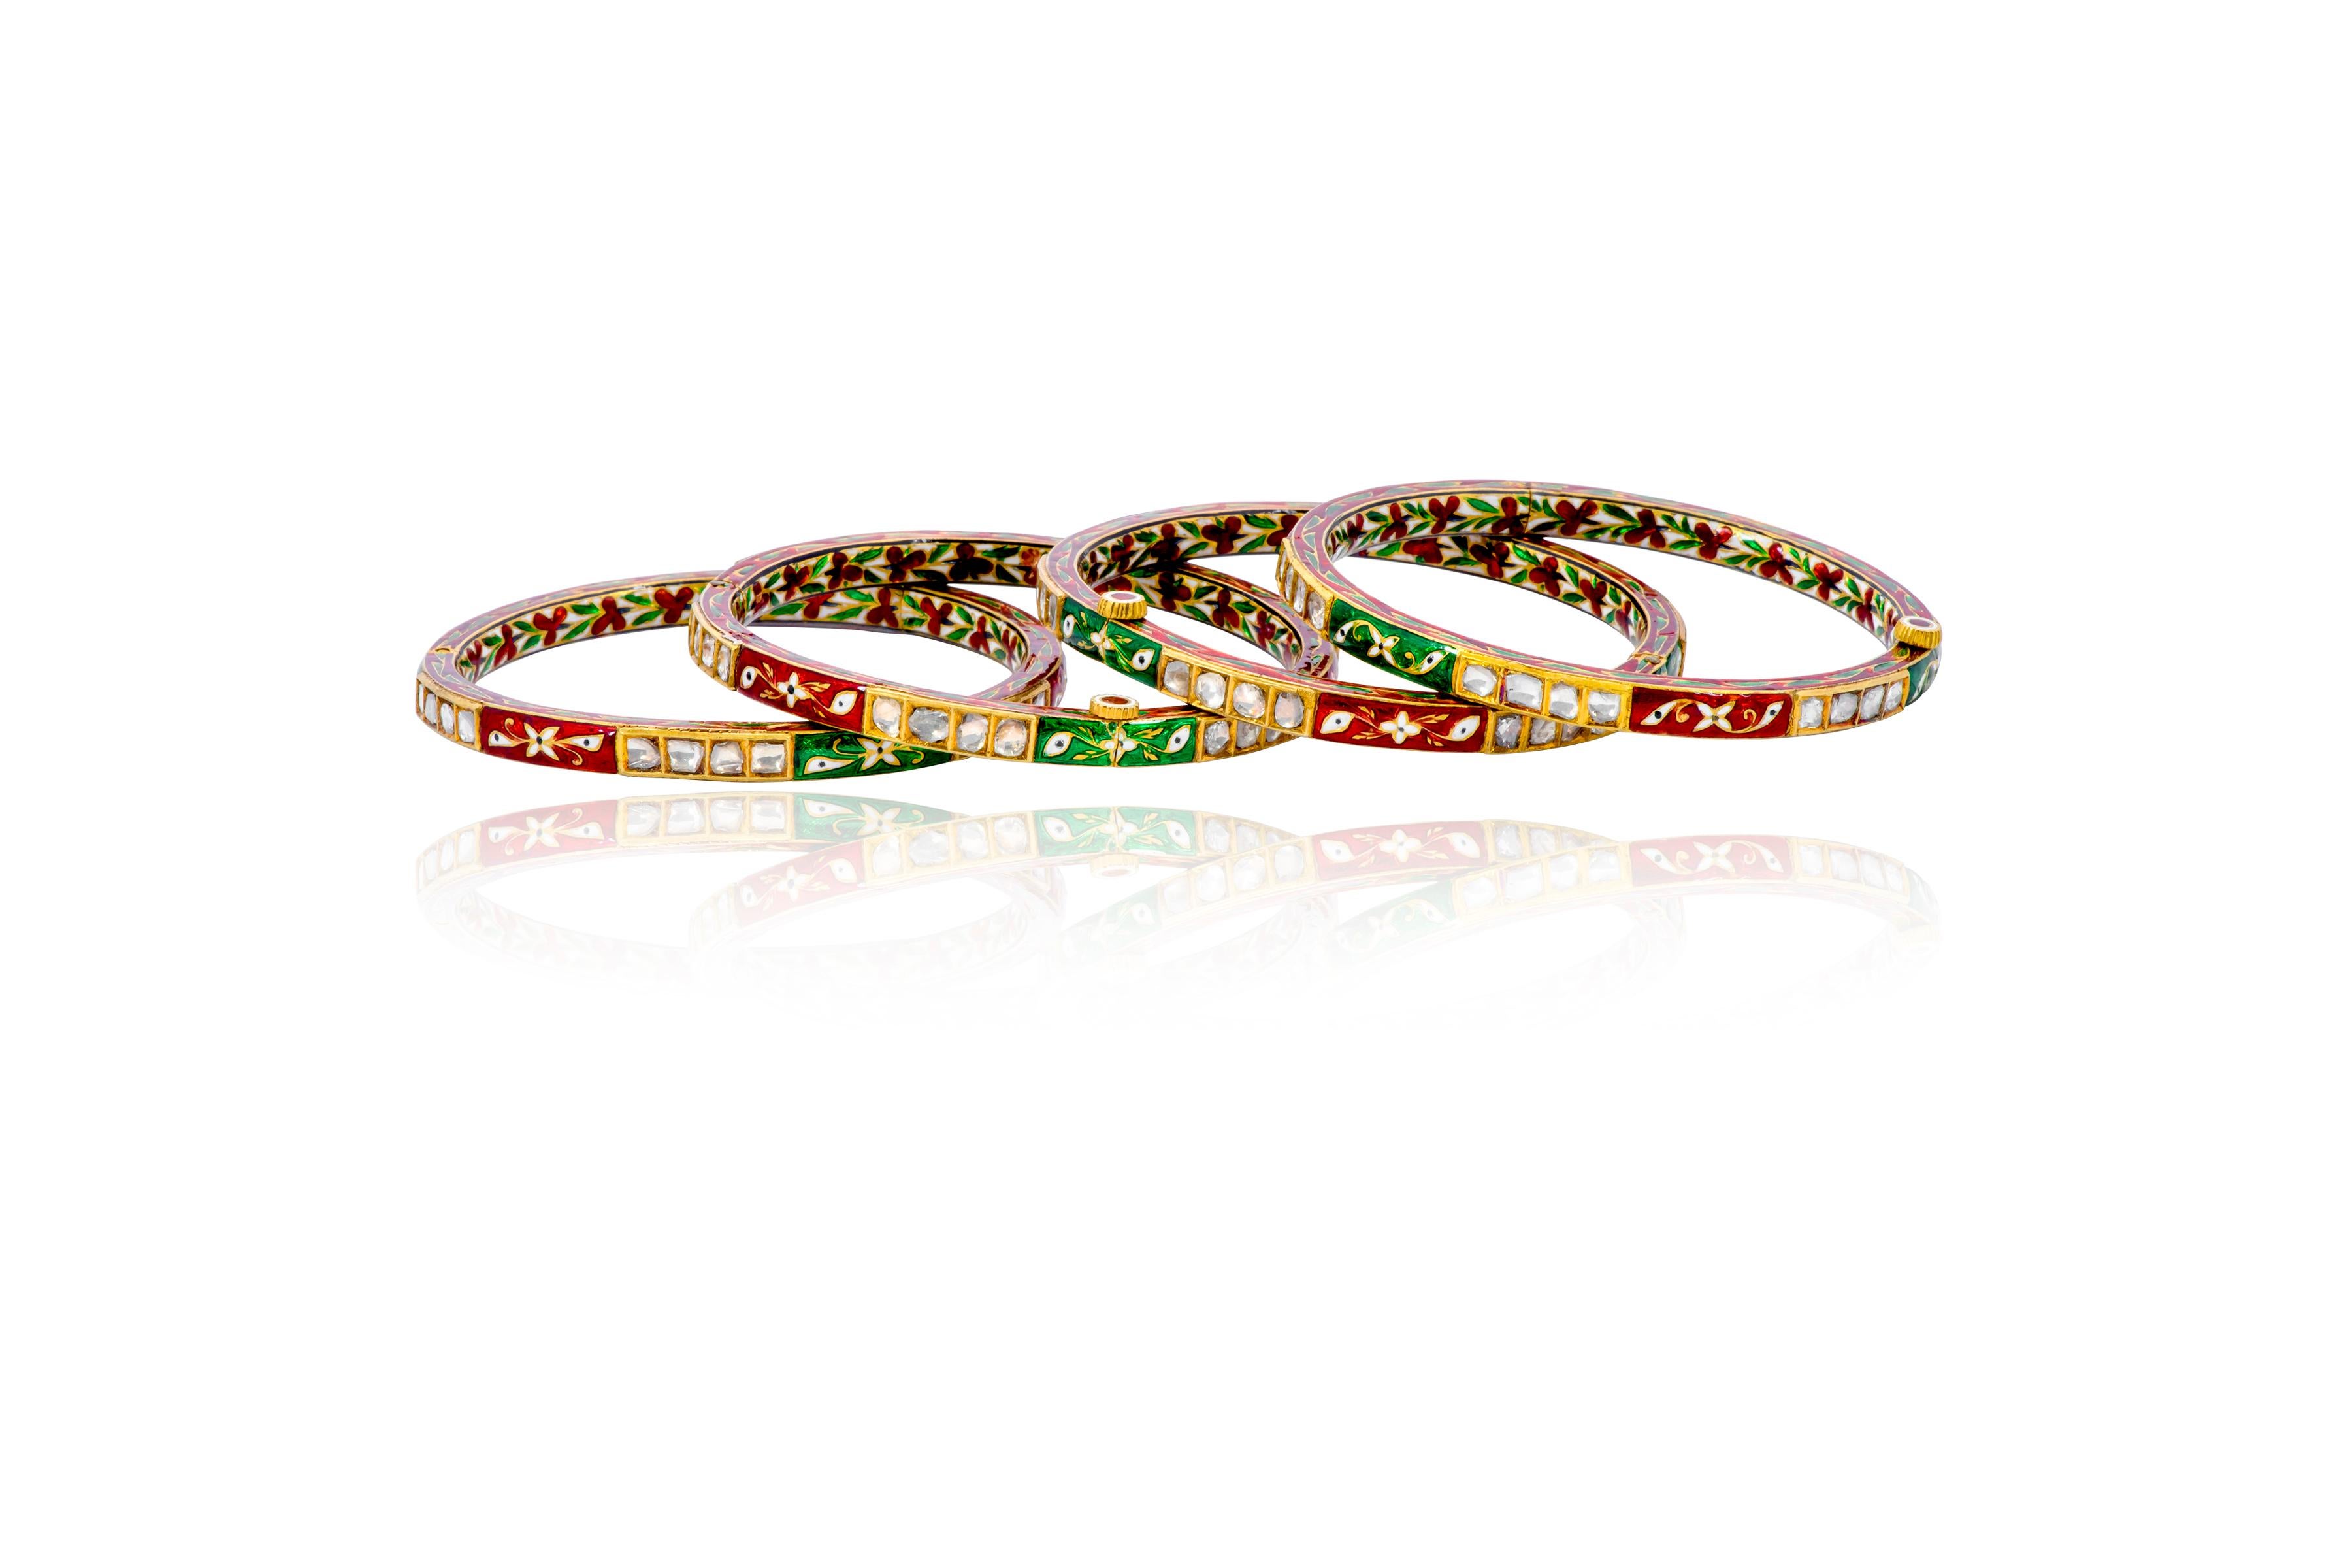 22 Karat Gold Diamond Three Tennis Bangle Bracelets with Colorful Enamel Work

This exemplary Mughal era style hand-made Polki diamond single line bangle with colorful enamel is eternal. The bangle design is the typical “churi” style with solitaire